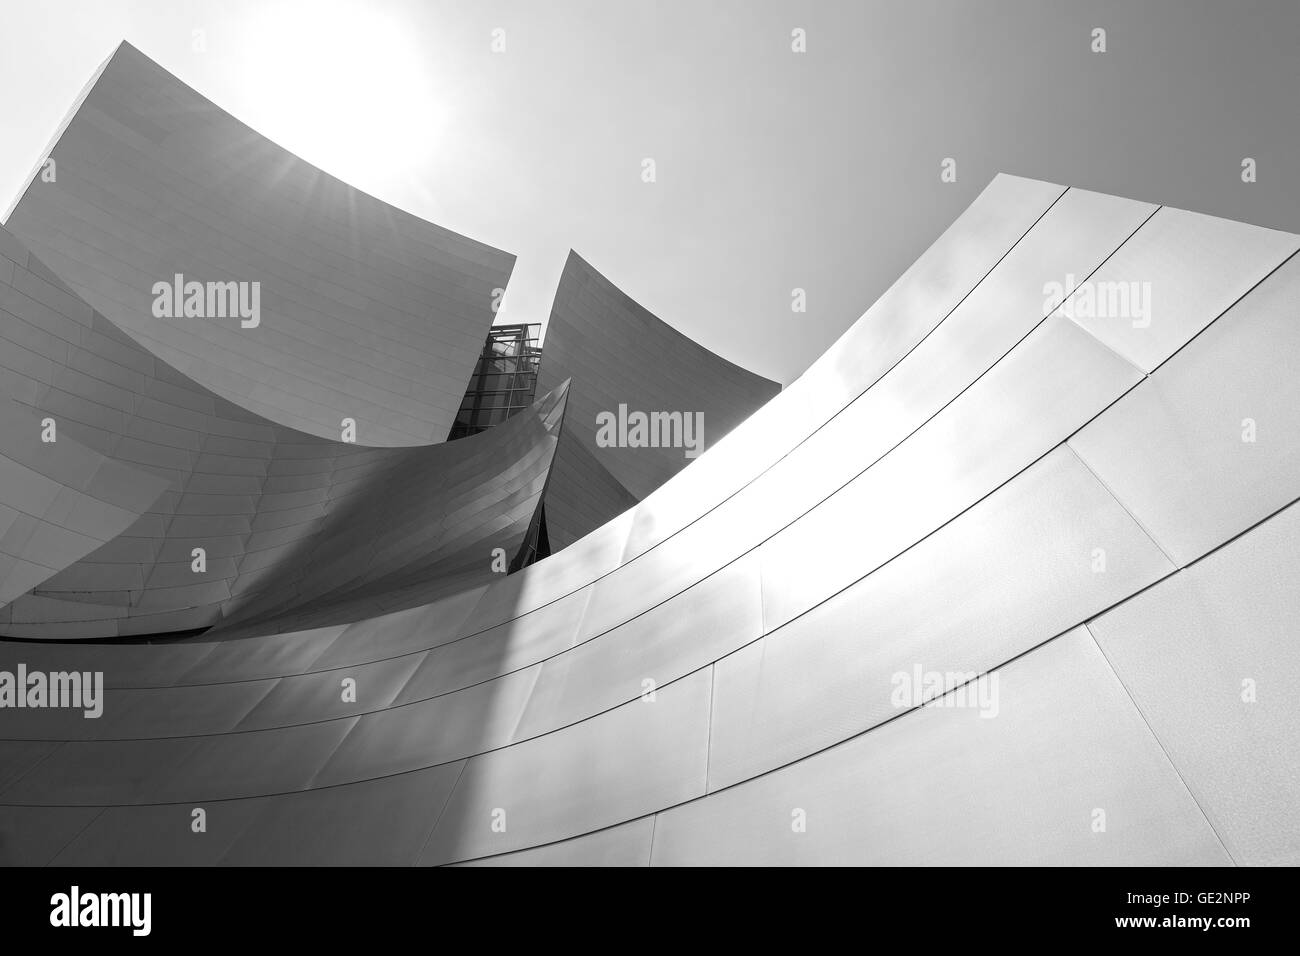 Walt Disney Concert Hall designed by architect Frank Gehry. Stock Photo